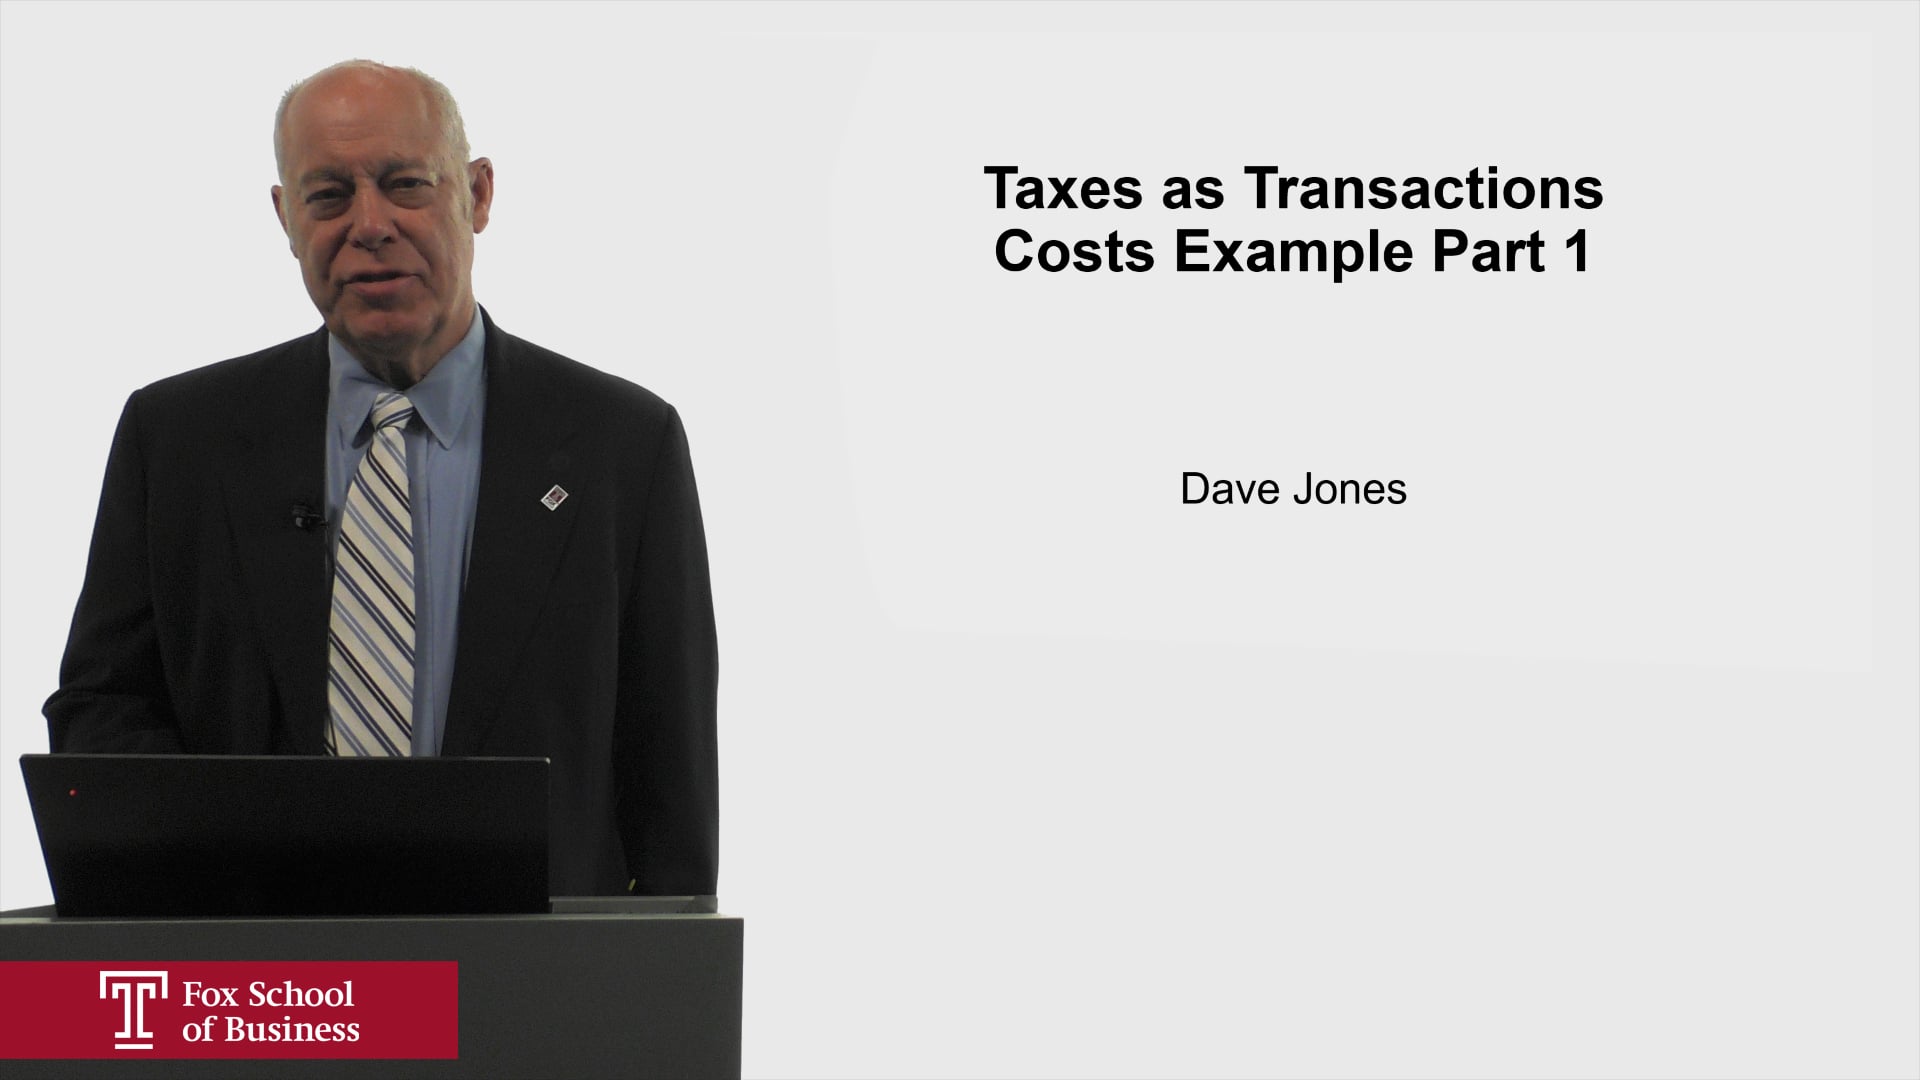 Taxes as Transactions Costs Example Part 1